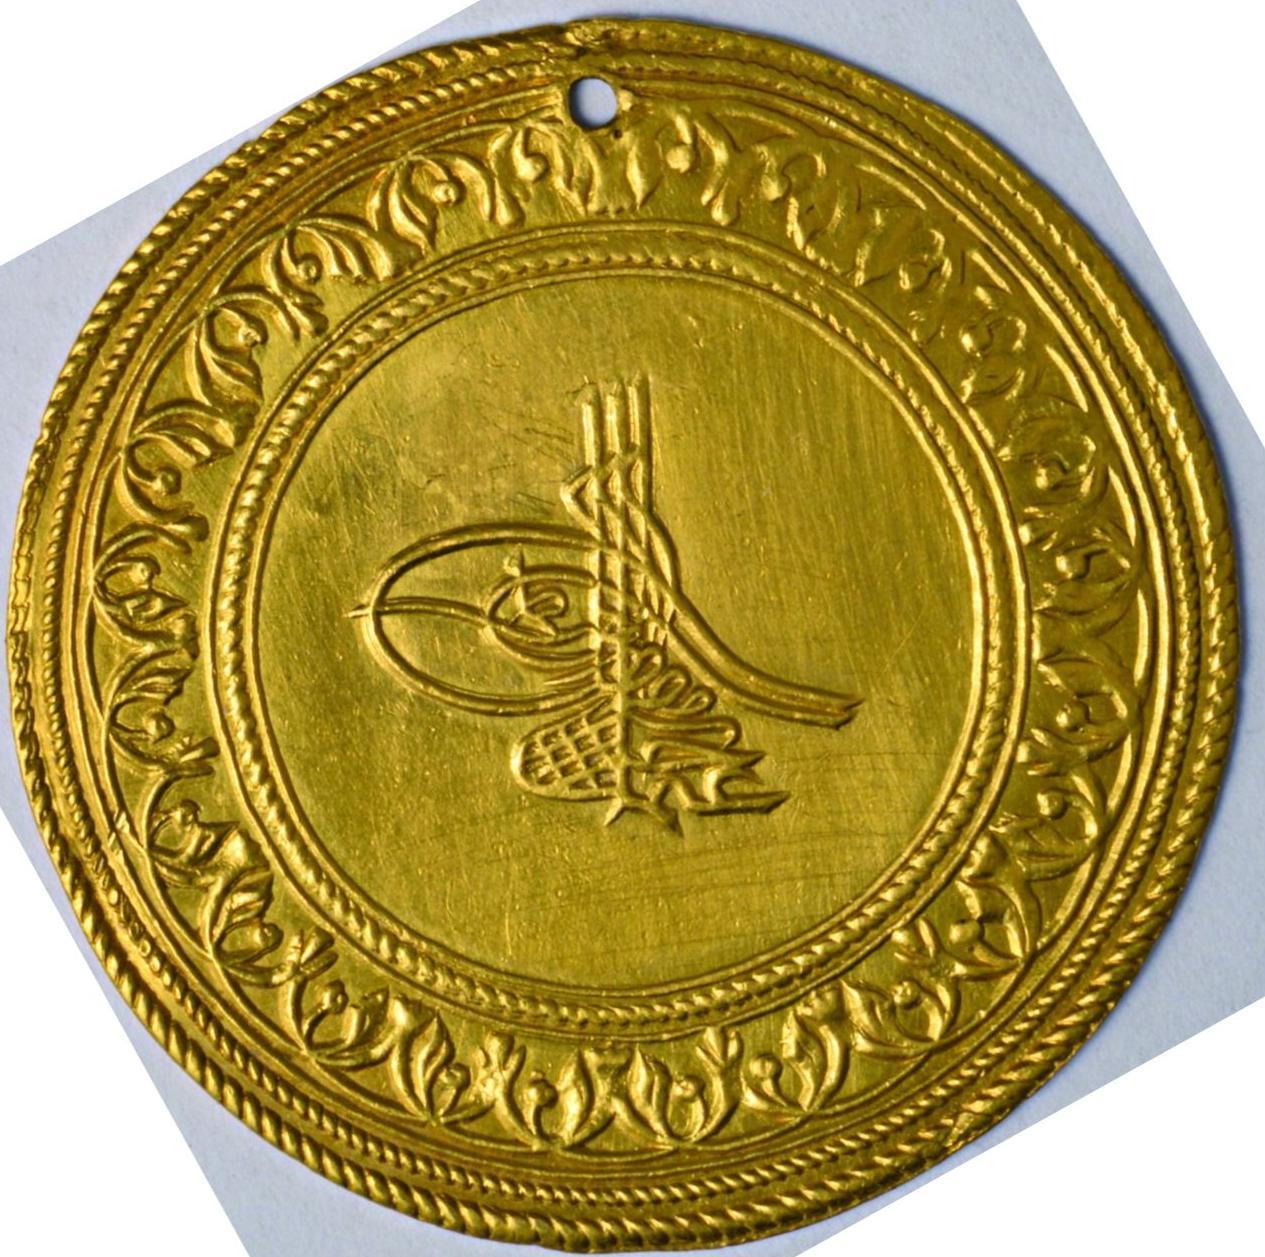 2b- Gold coins minted at Imperial Mint during the period of Sultan Ahmed III with the inscription“minted in ‘Islambol’” (Istanbul Archeology Museum, Coins Section)